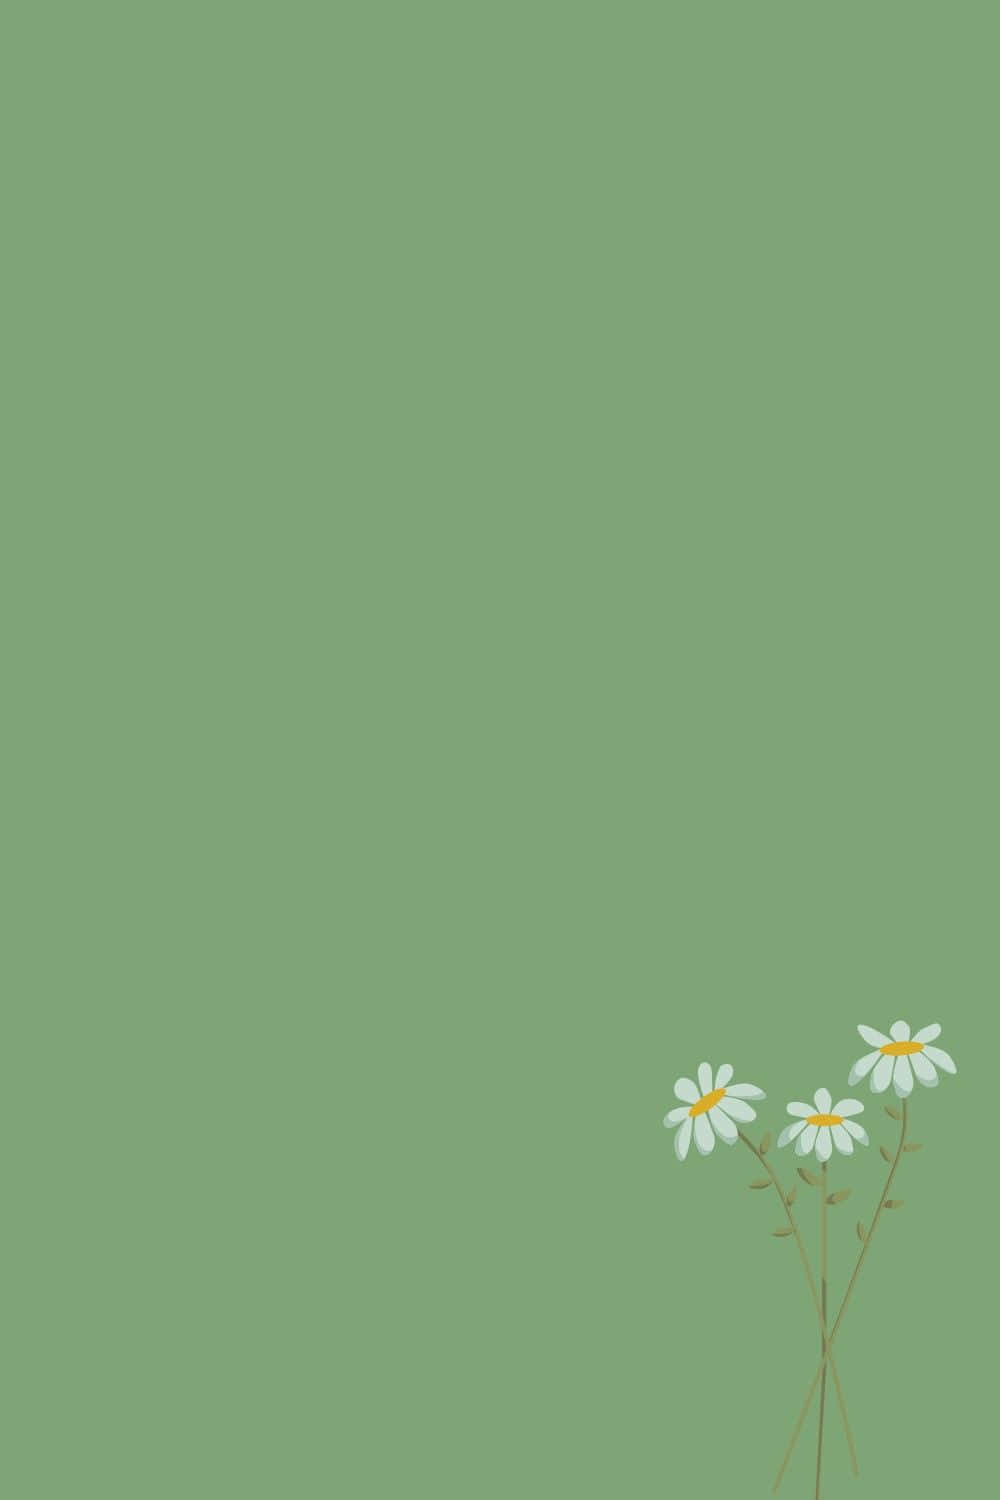 Sage Green Background Wallpaper Design Images | Free Photos, PNG Stickers,  Wallpapers & Backgrounds - rawpixel